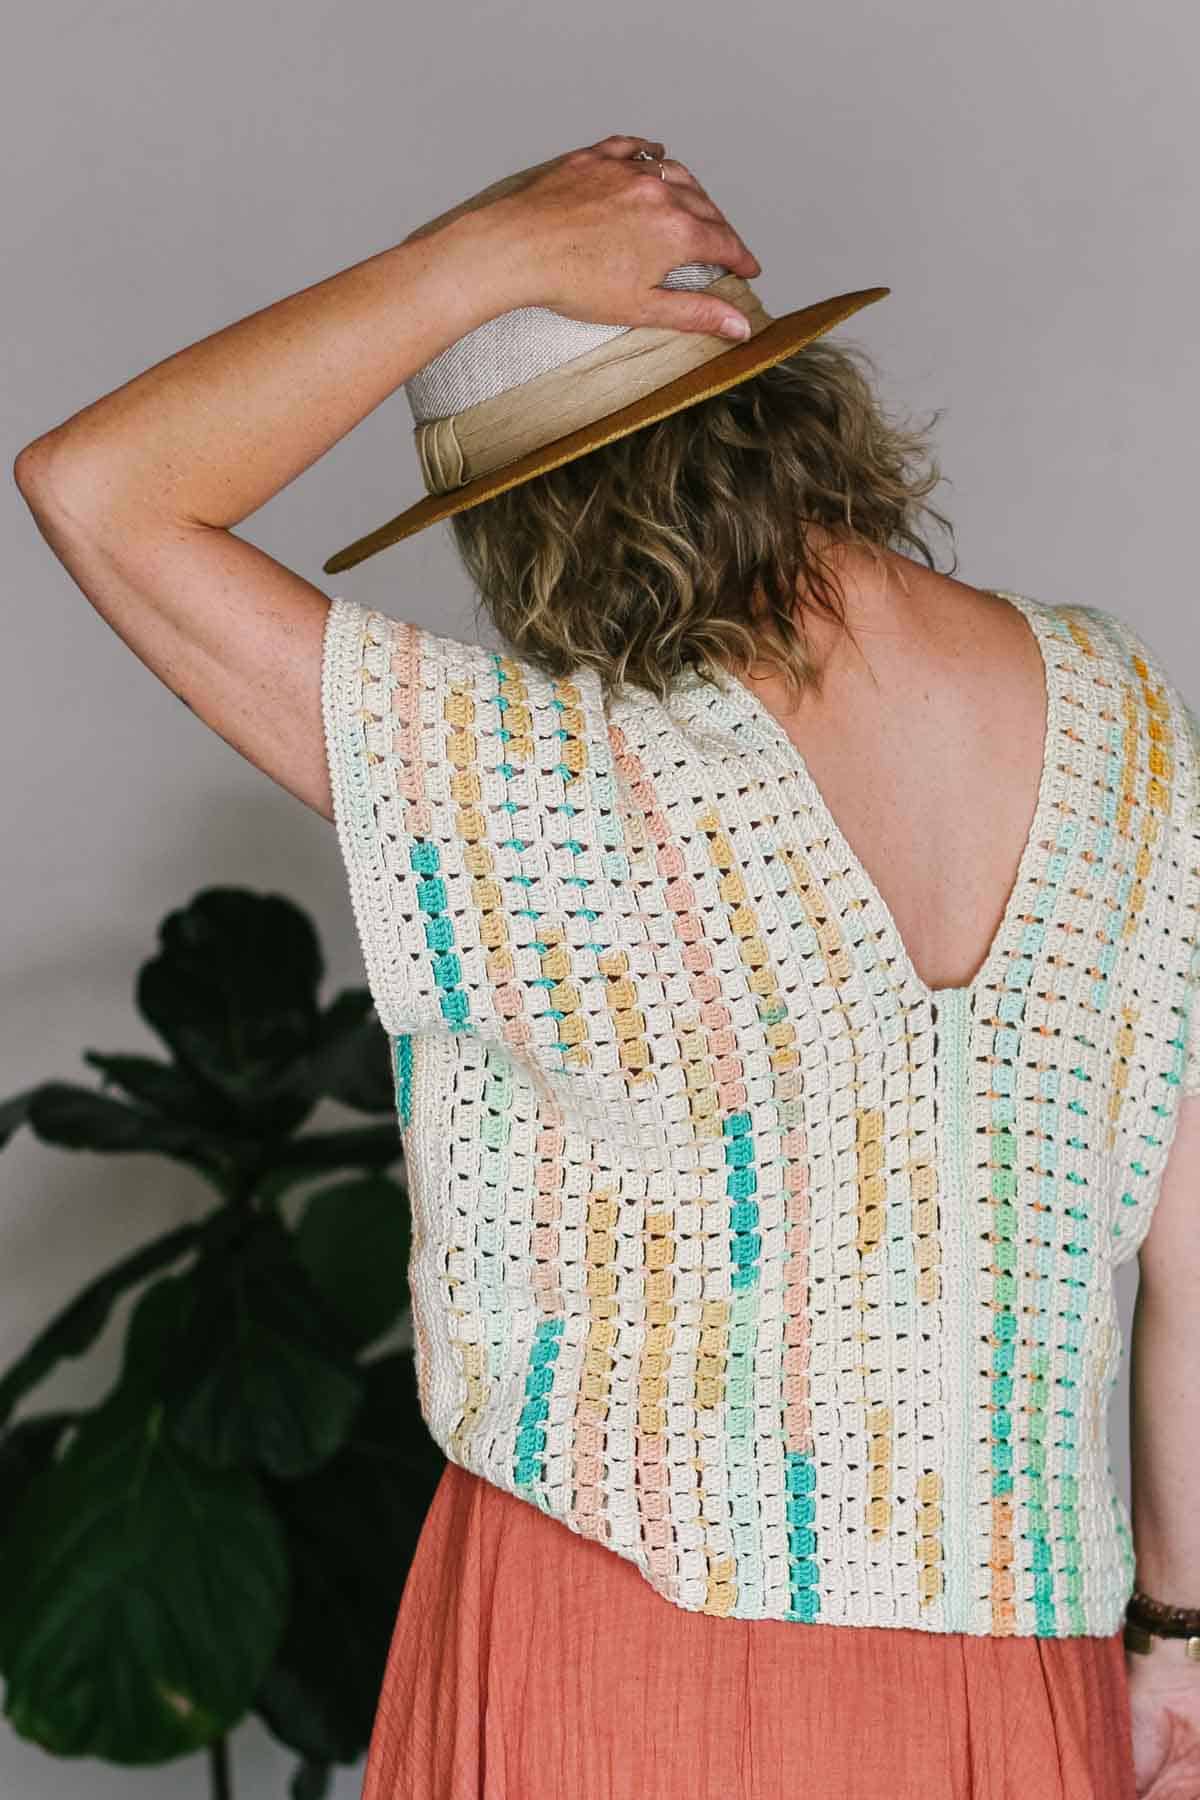 Crochet tee made from rectangles, modeled on a woman facing away.